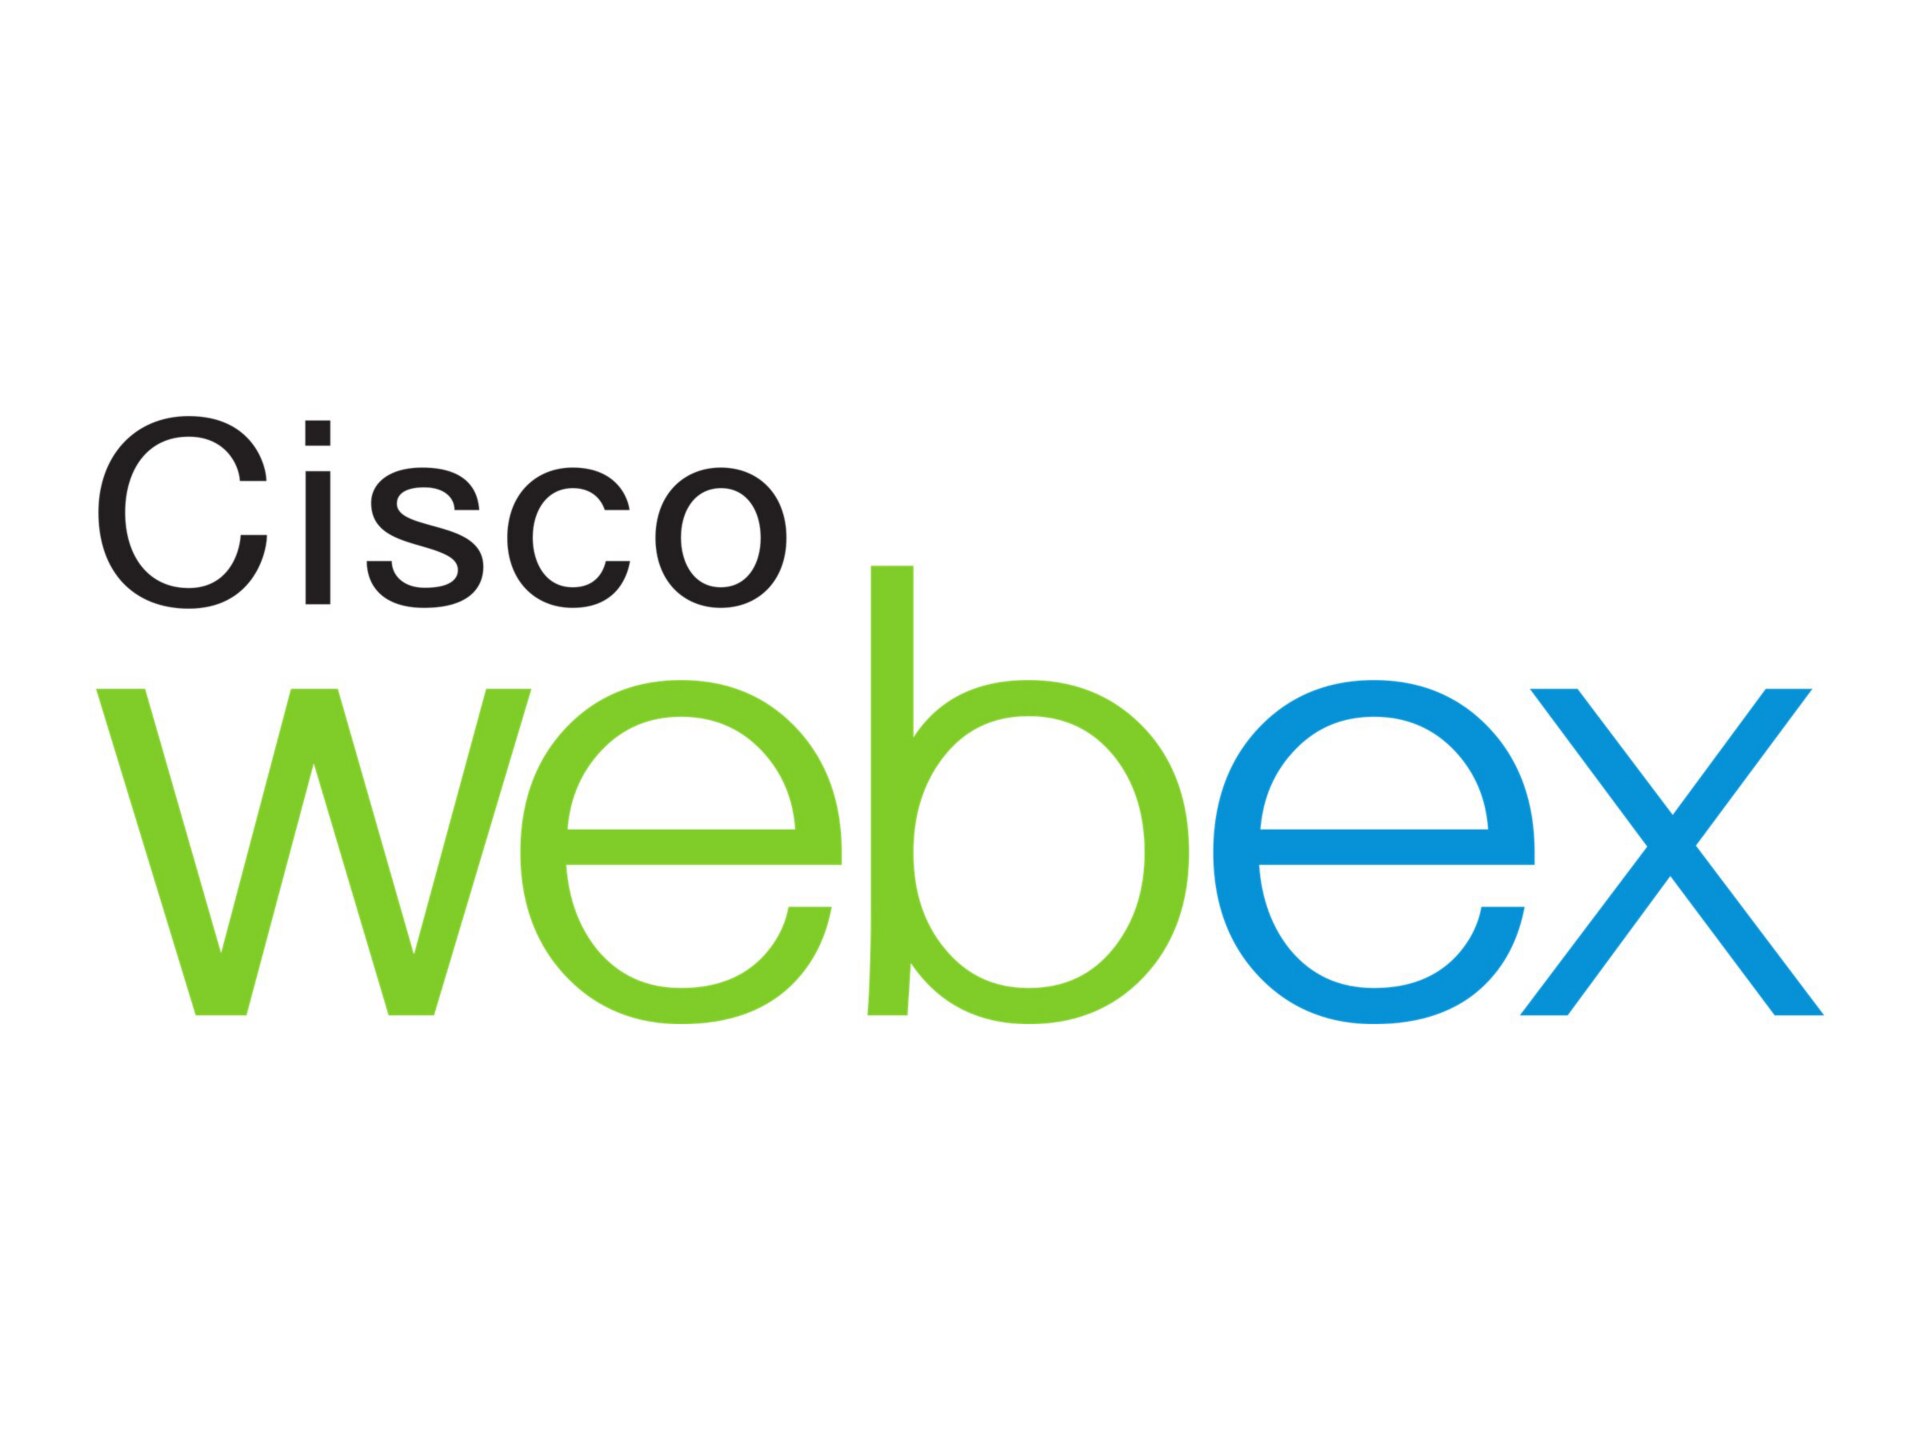 Cisco WebEx Cloud Storage - subscription license (35 months) - additional 1 GB capacity